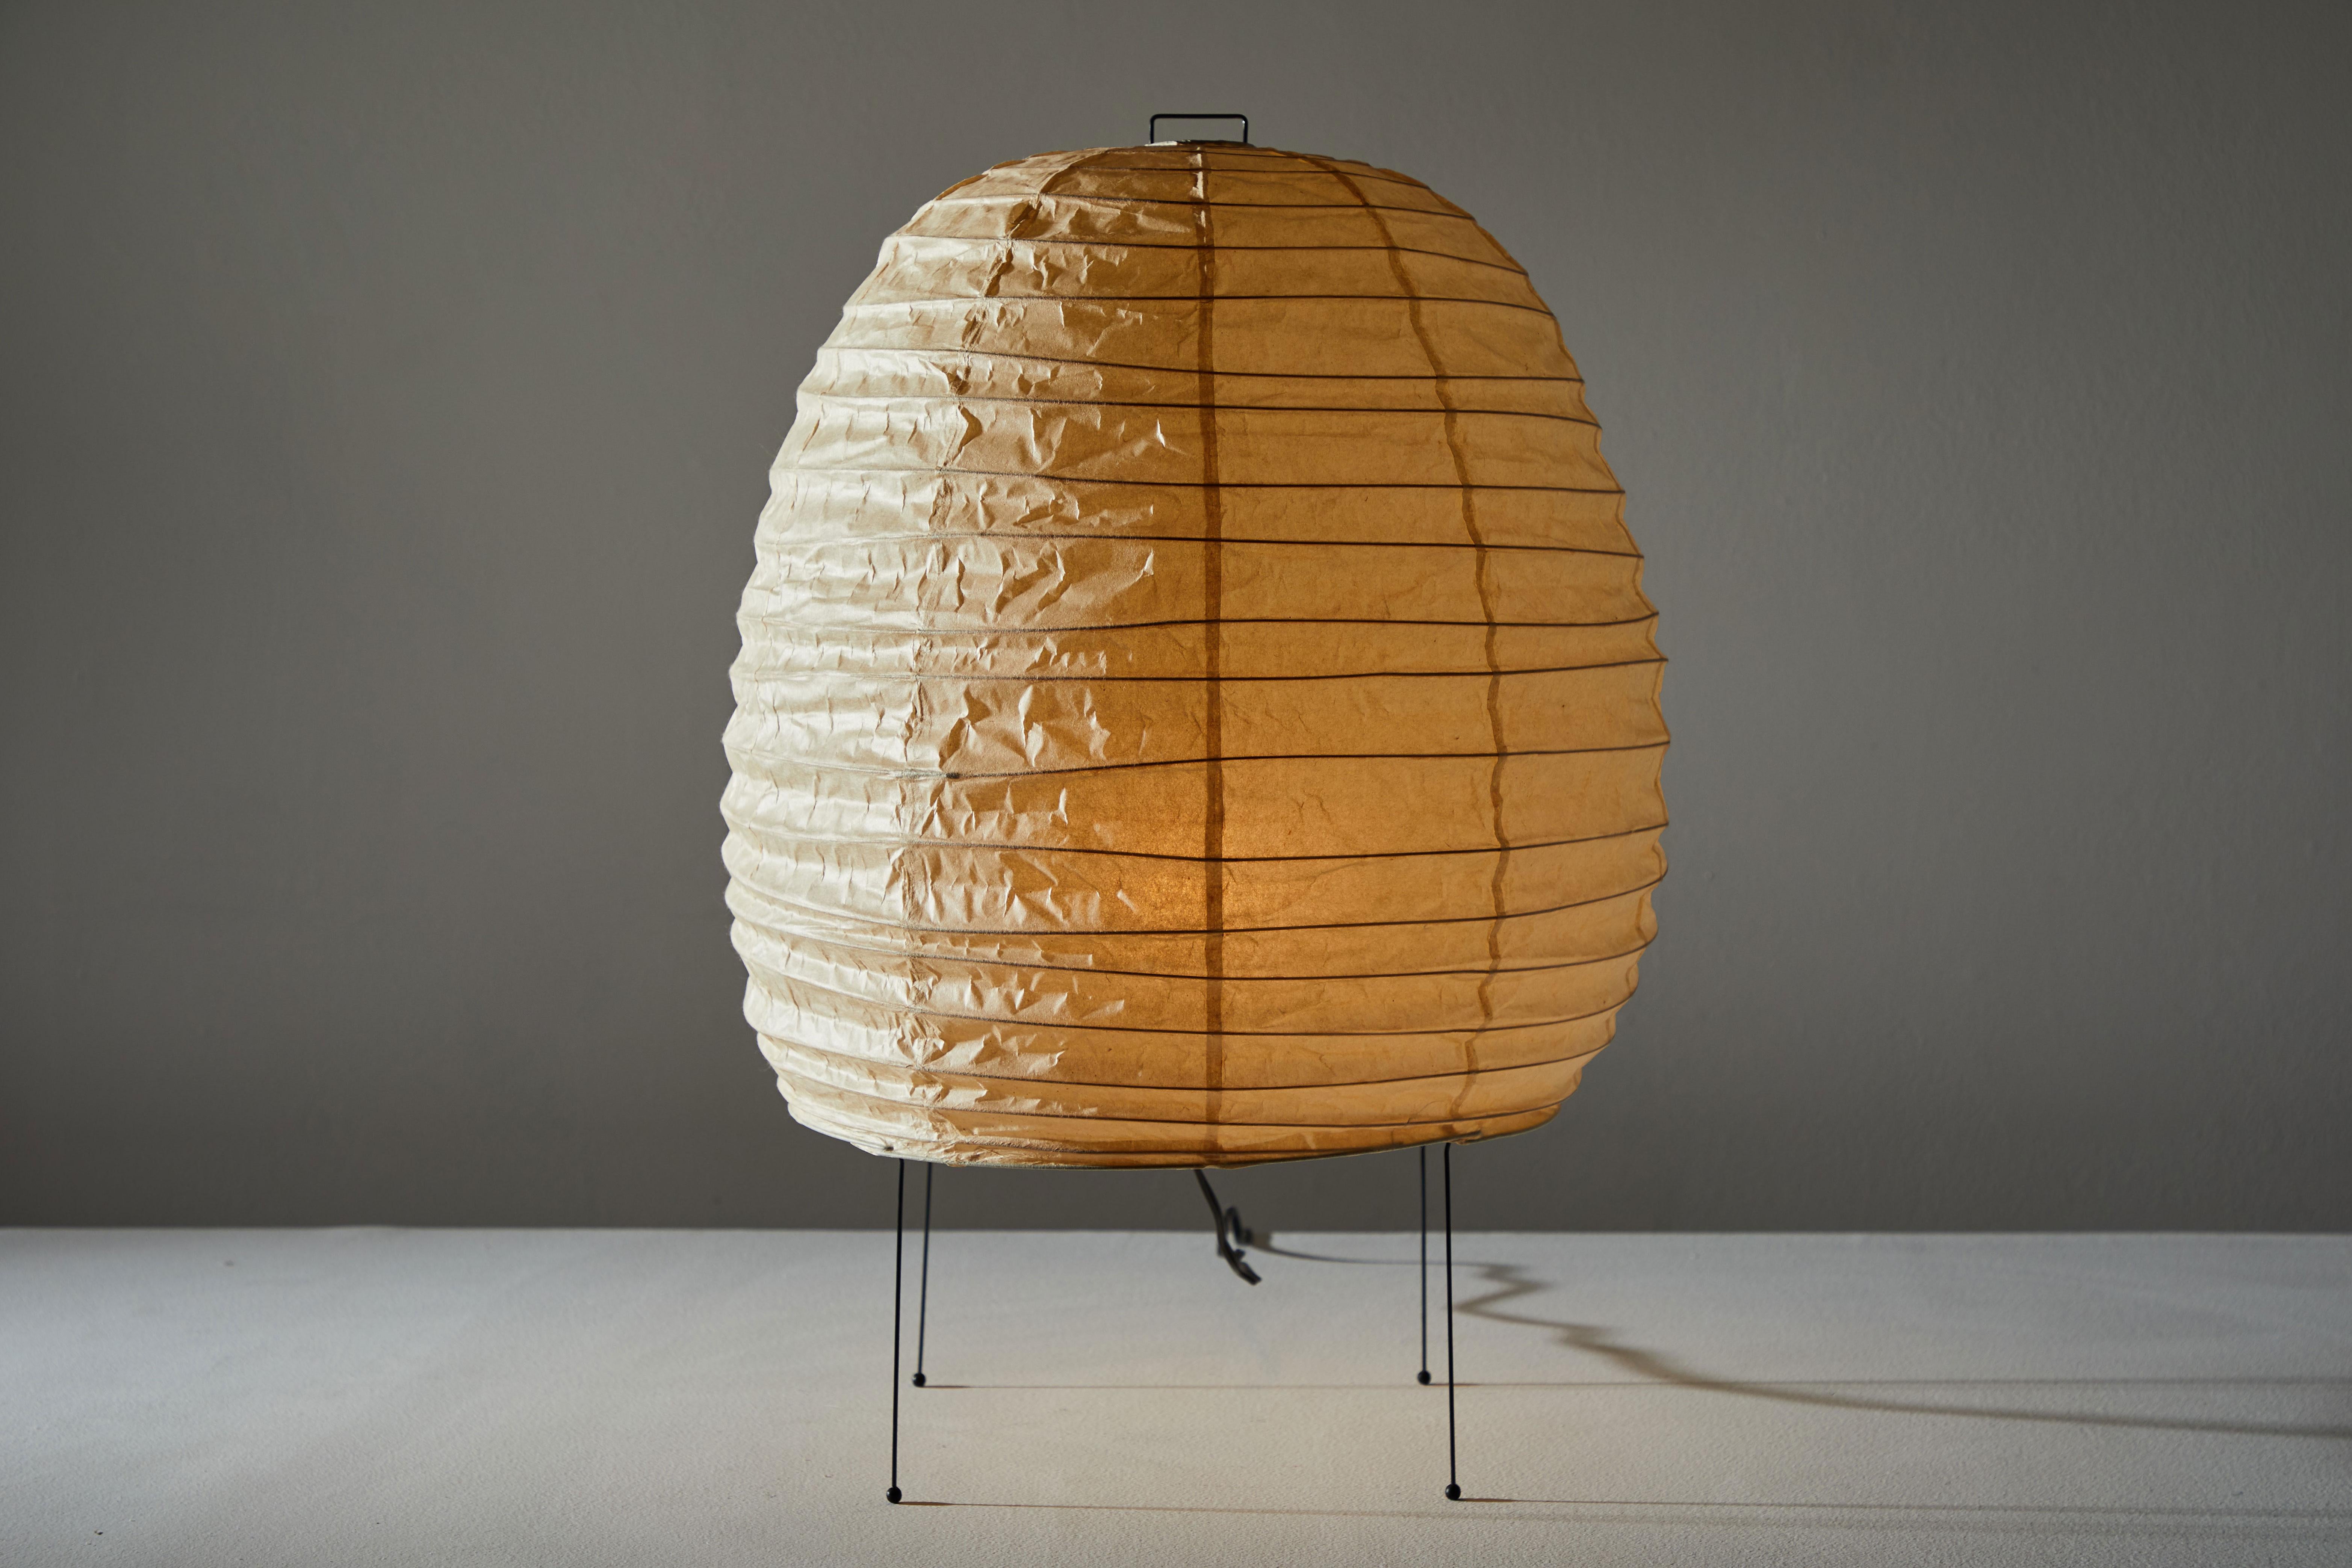 Large table lamp by Isamu Noguchi for Akari. Designed and manufactured in Japan circa 1950s. Rice paper and metal. Early edition with original sun/moon stamp. Original cord. Takes one E27 25w maximum bulb.